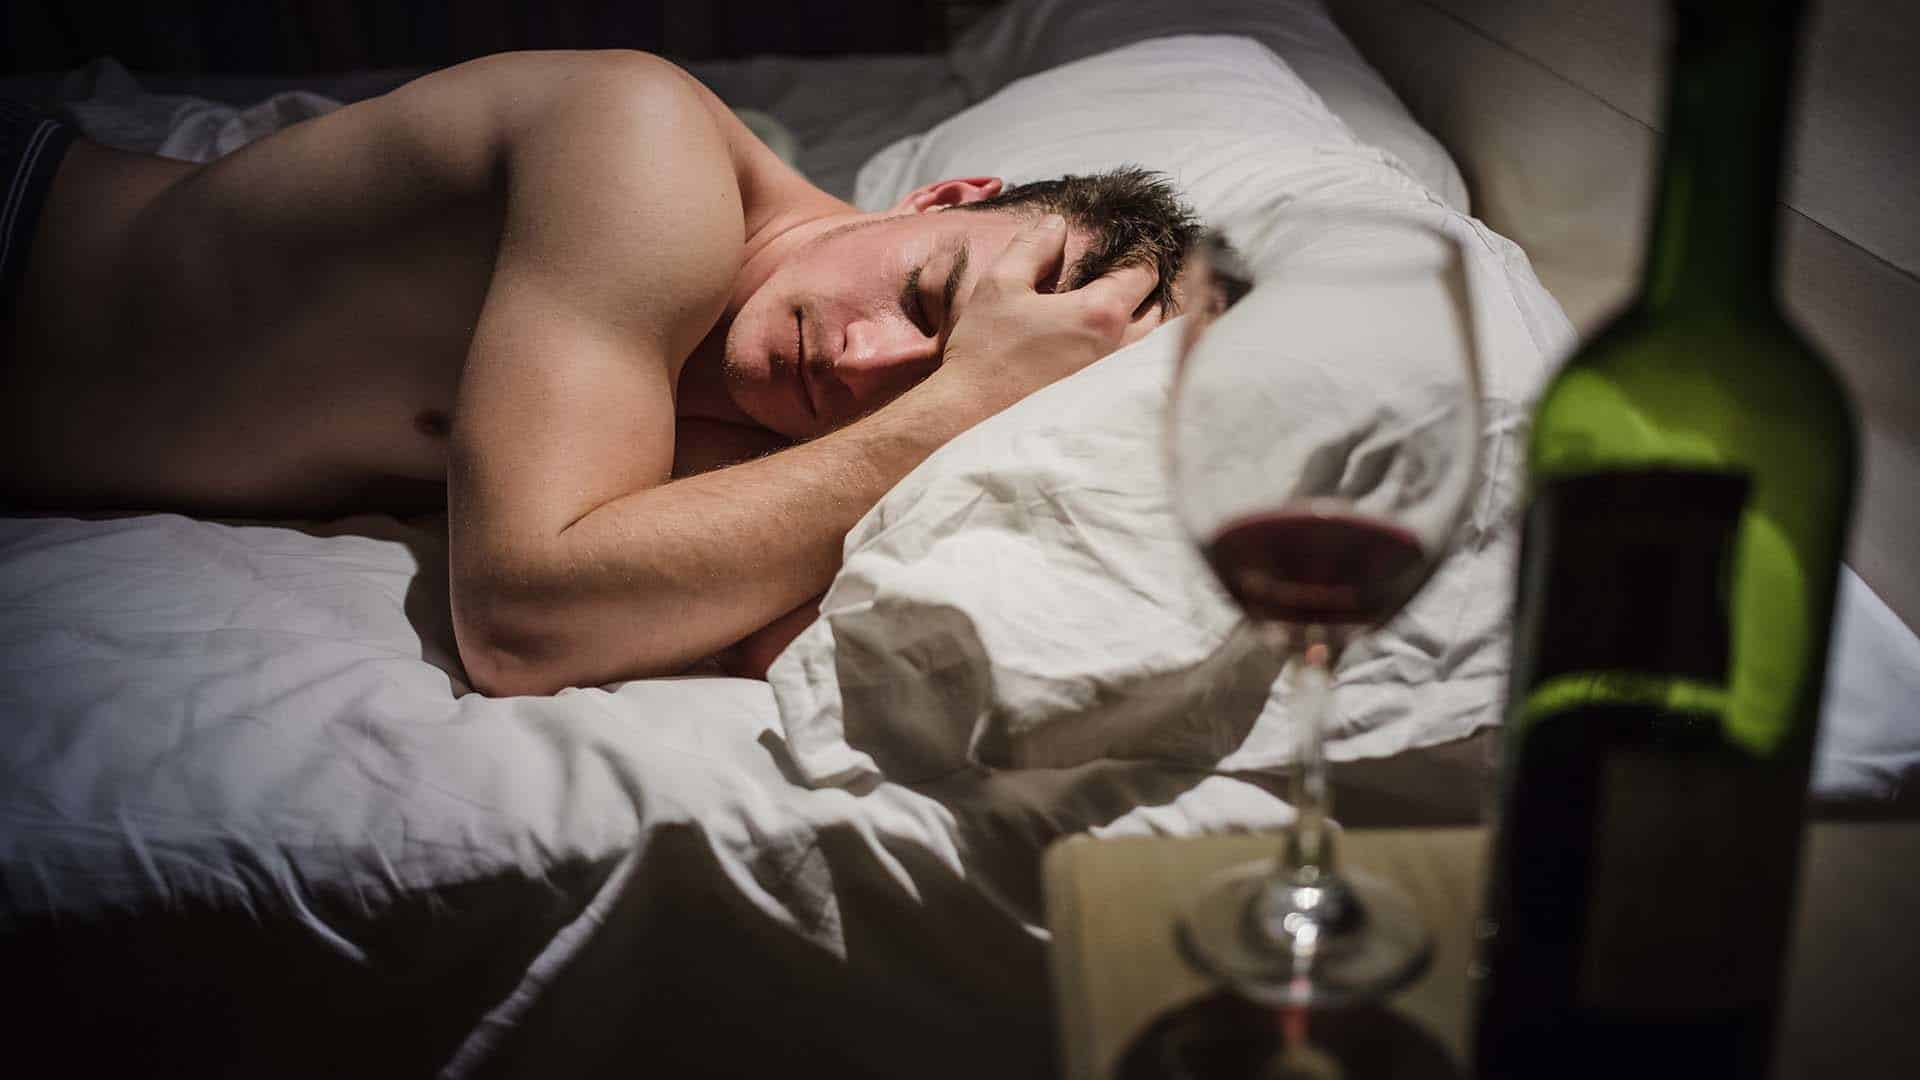 Hangover Man with Headaches in a Bed at Night and Wine bottle